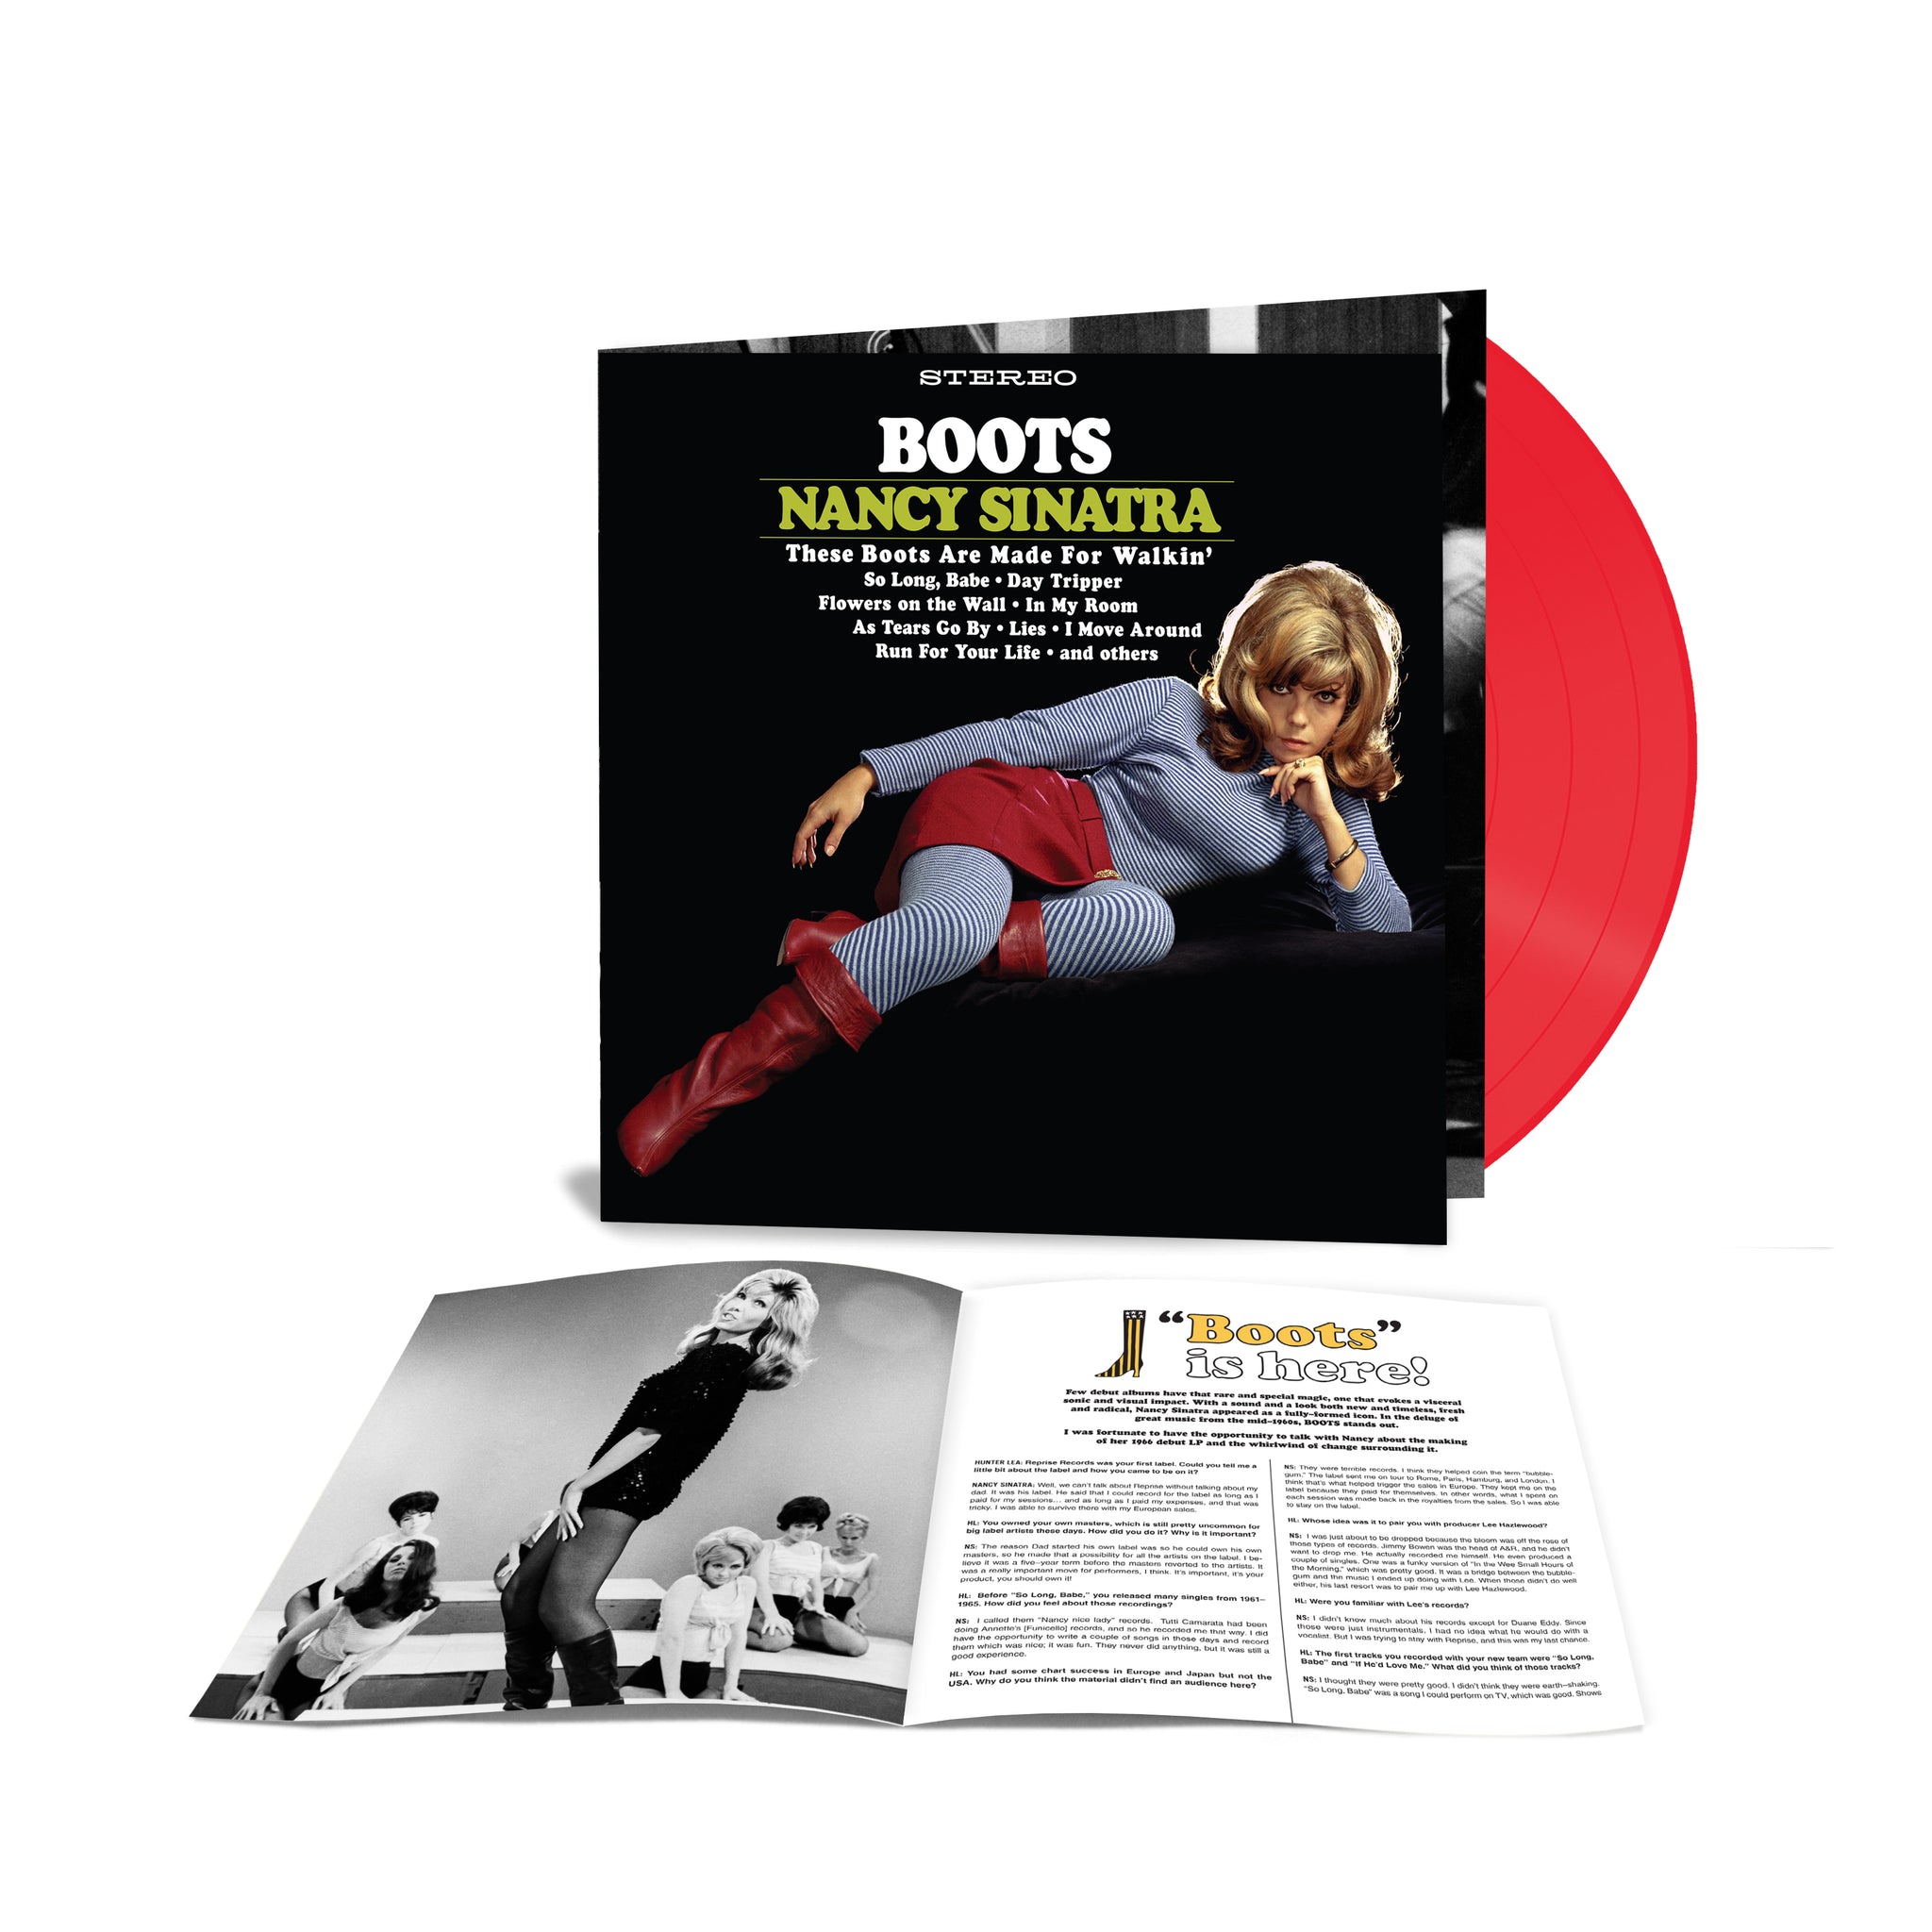 BOOTIQUE Exclusive "Walkin' Boots Red" Boots LP